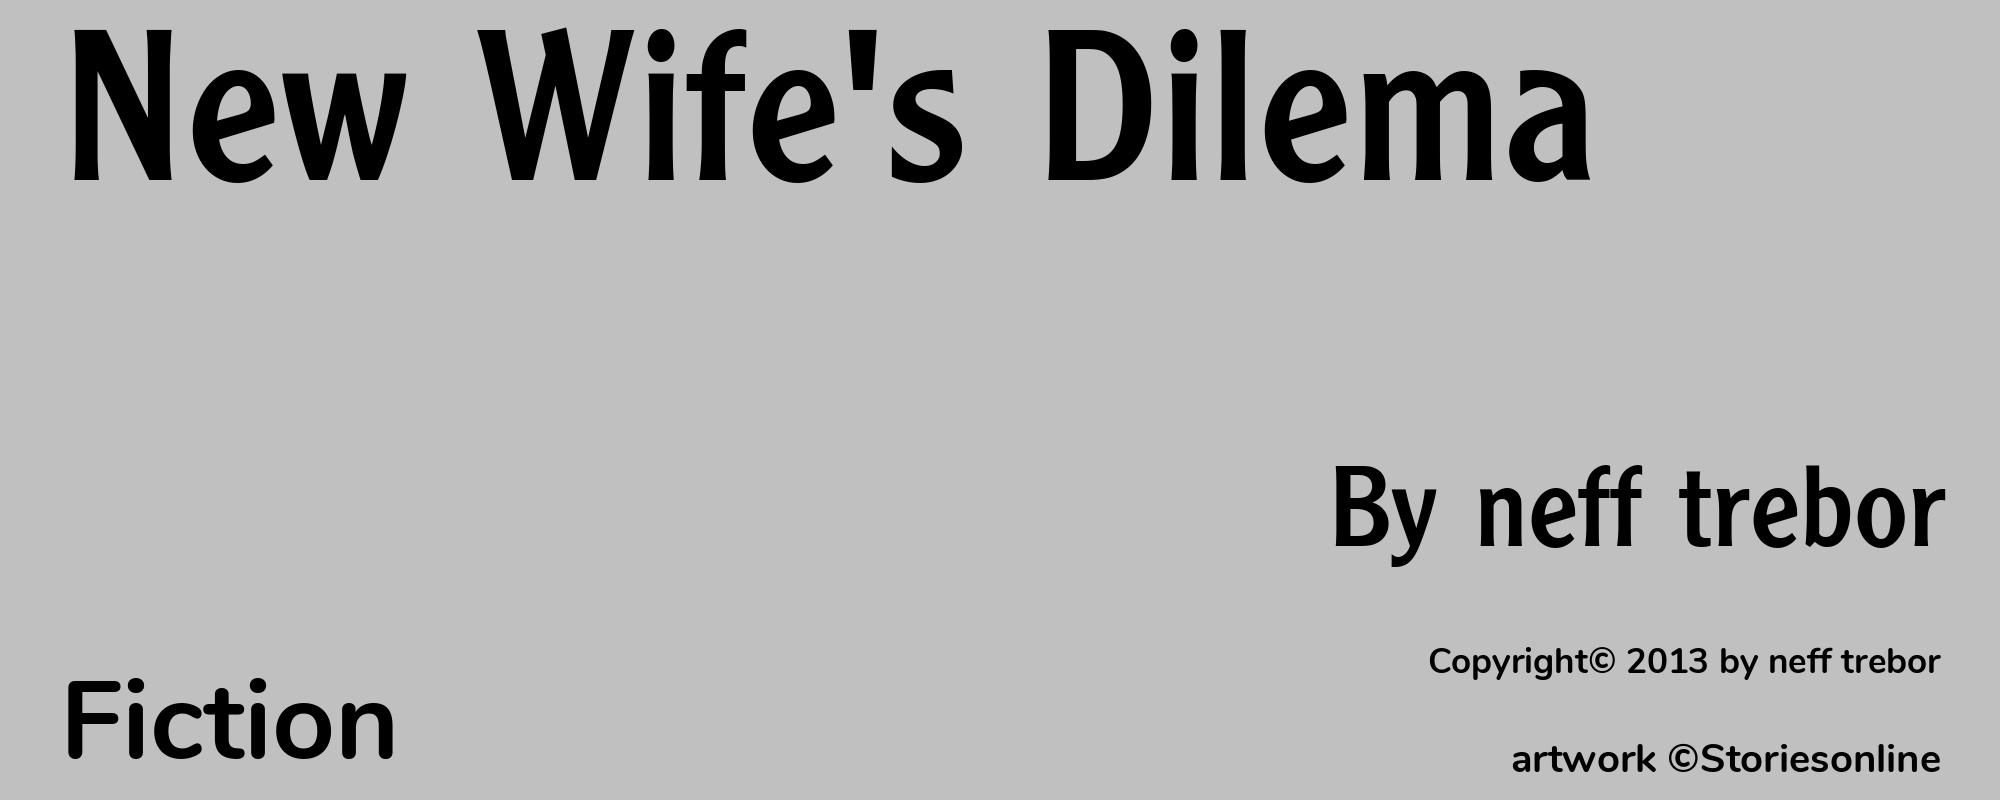 New Wife's Dilema - Cover